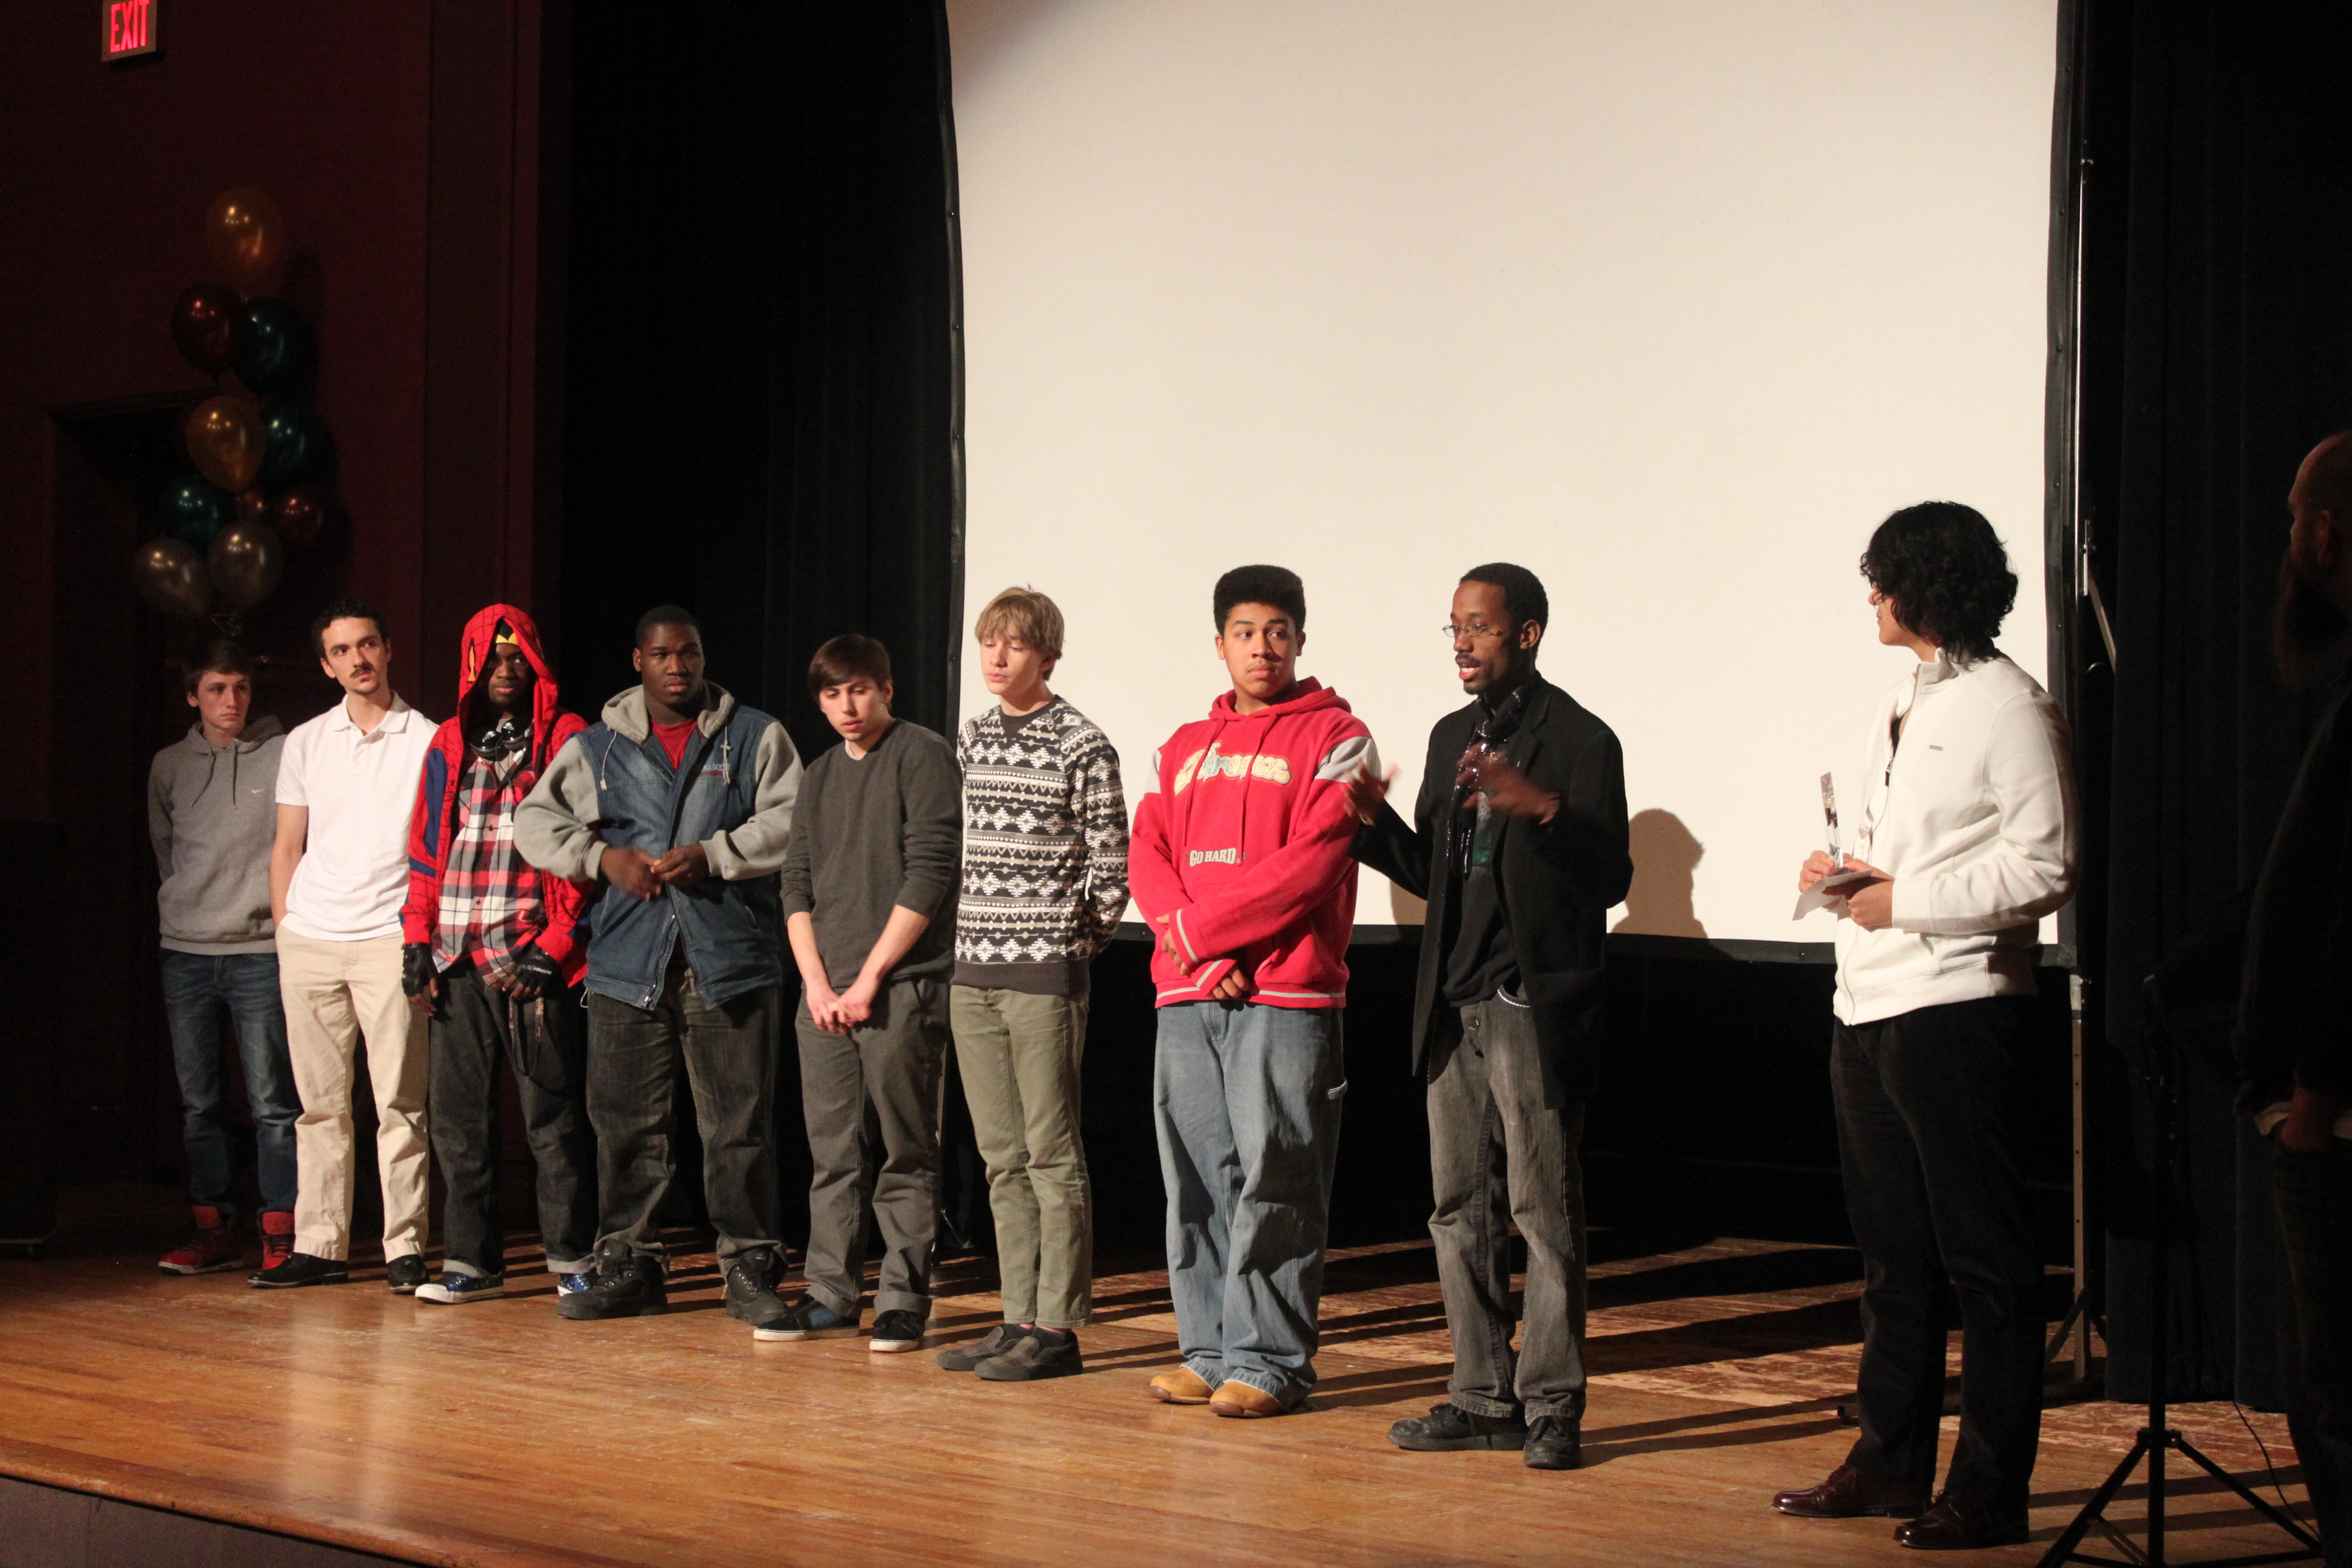 Area contestants participate in a Q& A session after the screening of their films.